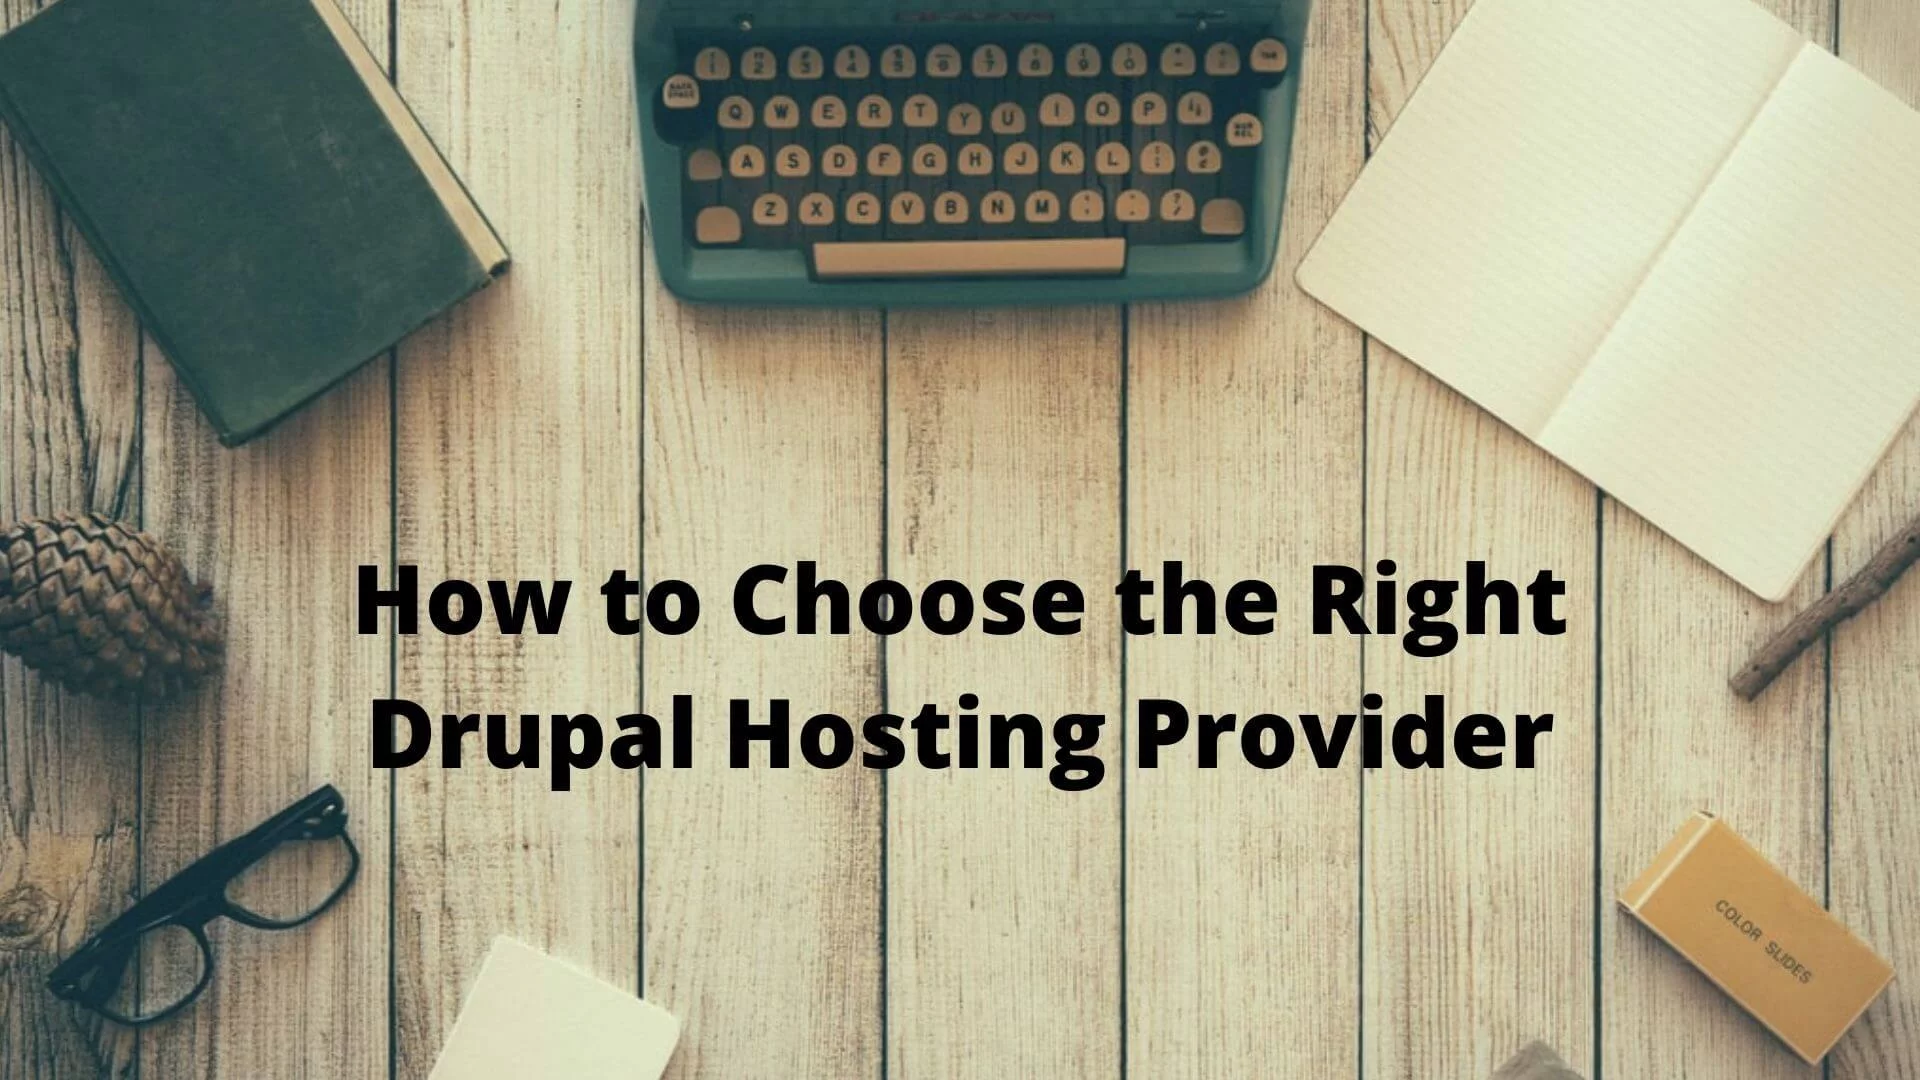 How-to-Choose-the-Right-Drupal-Hosting-Provider-1